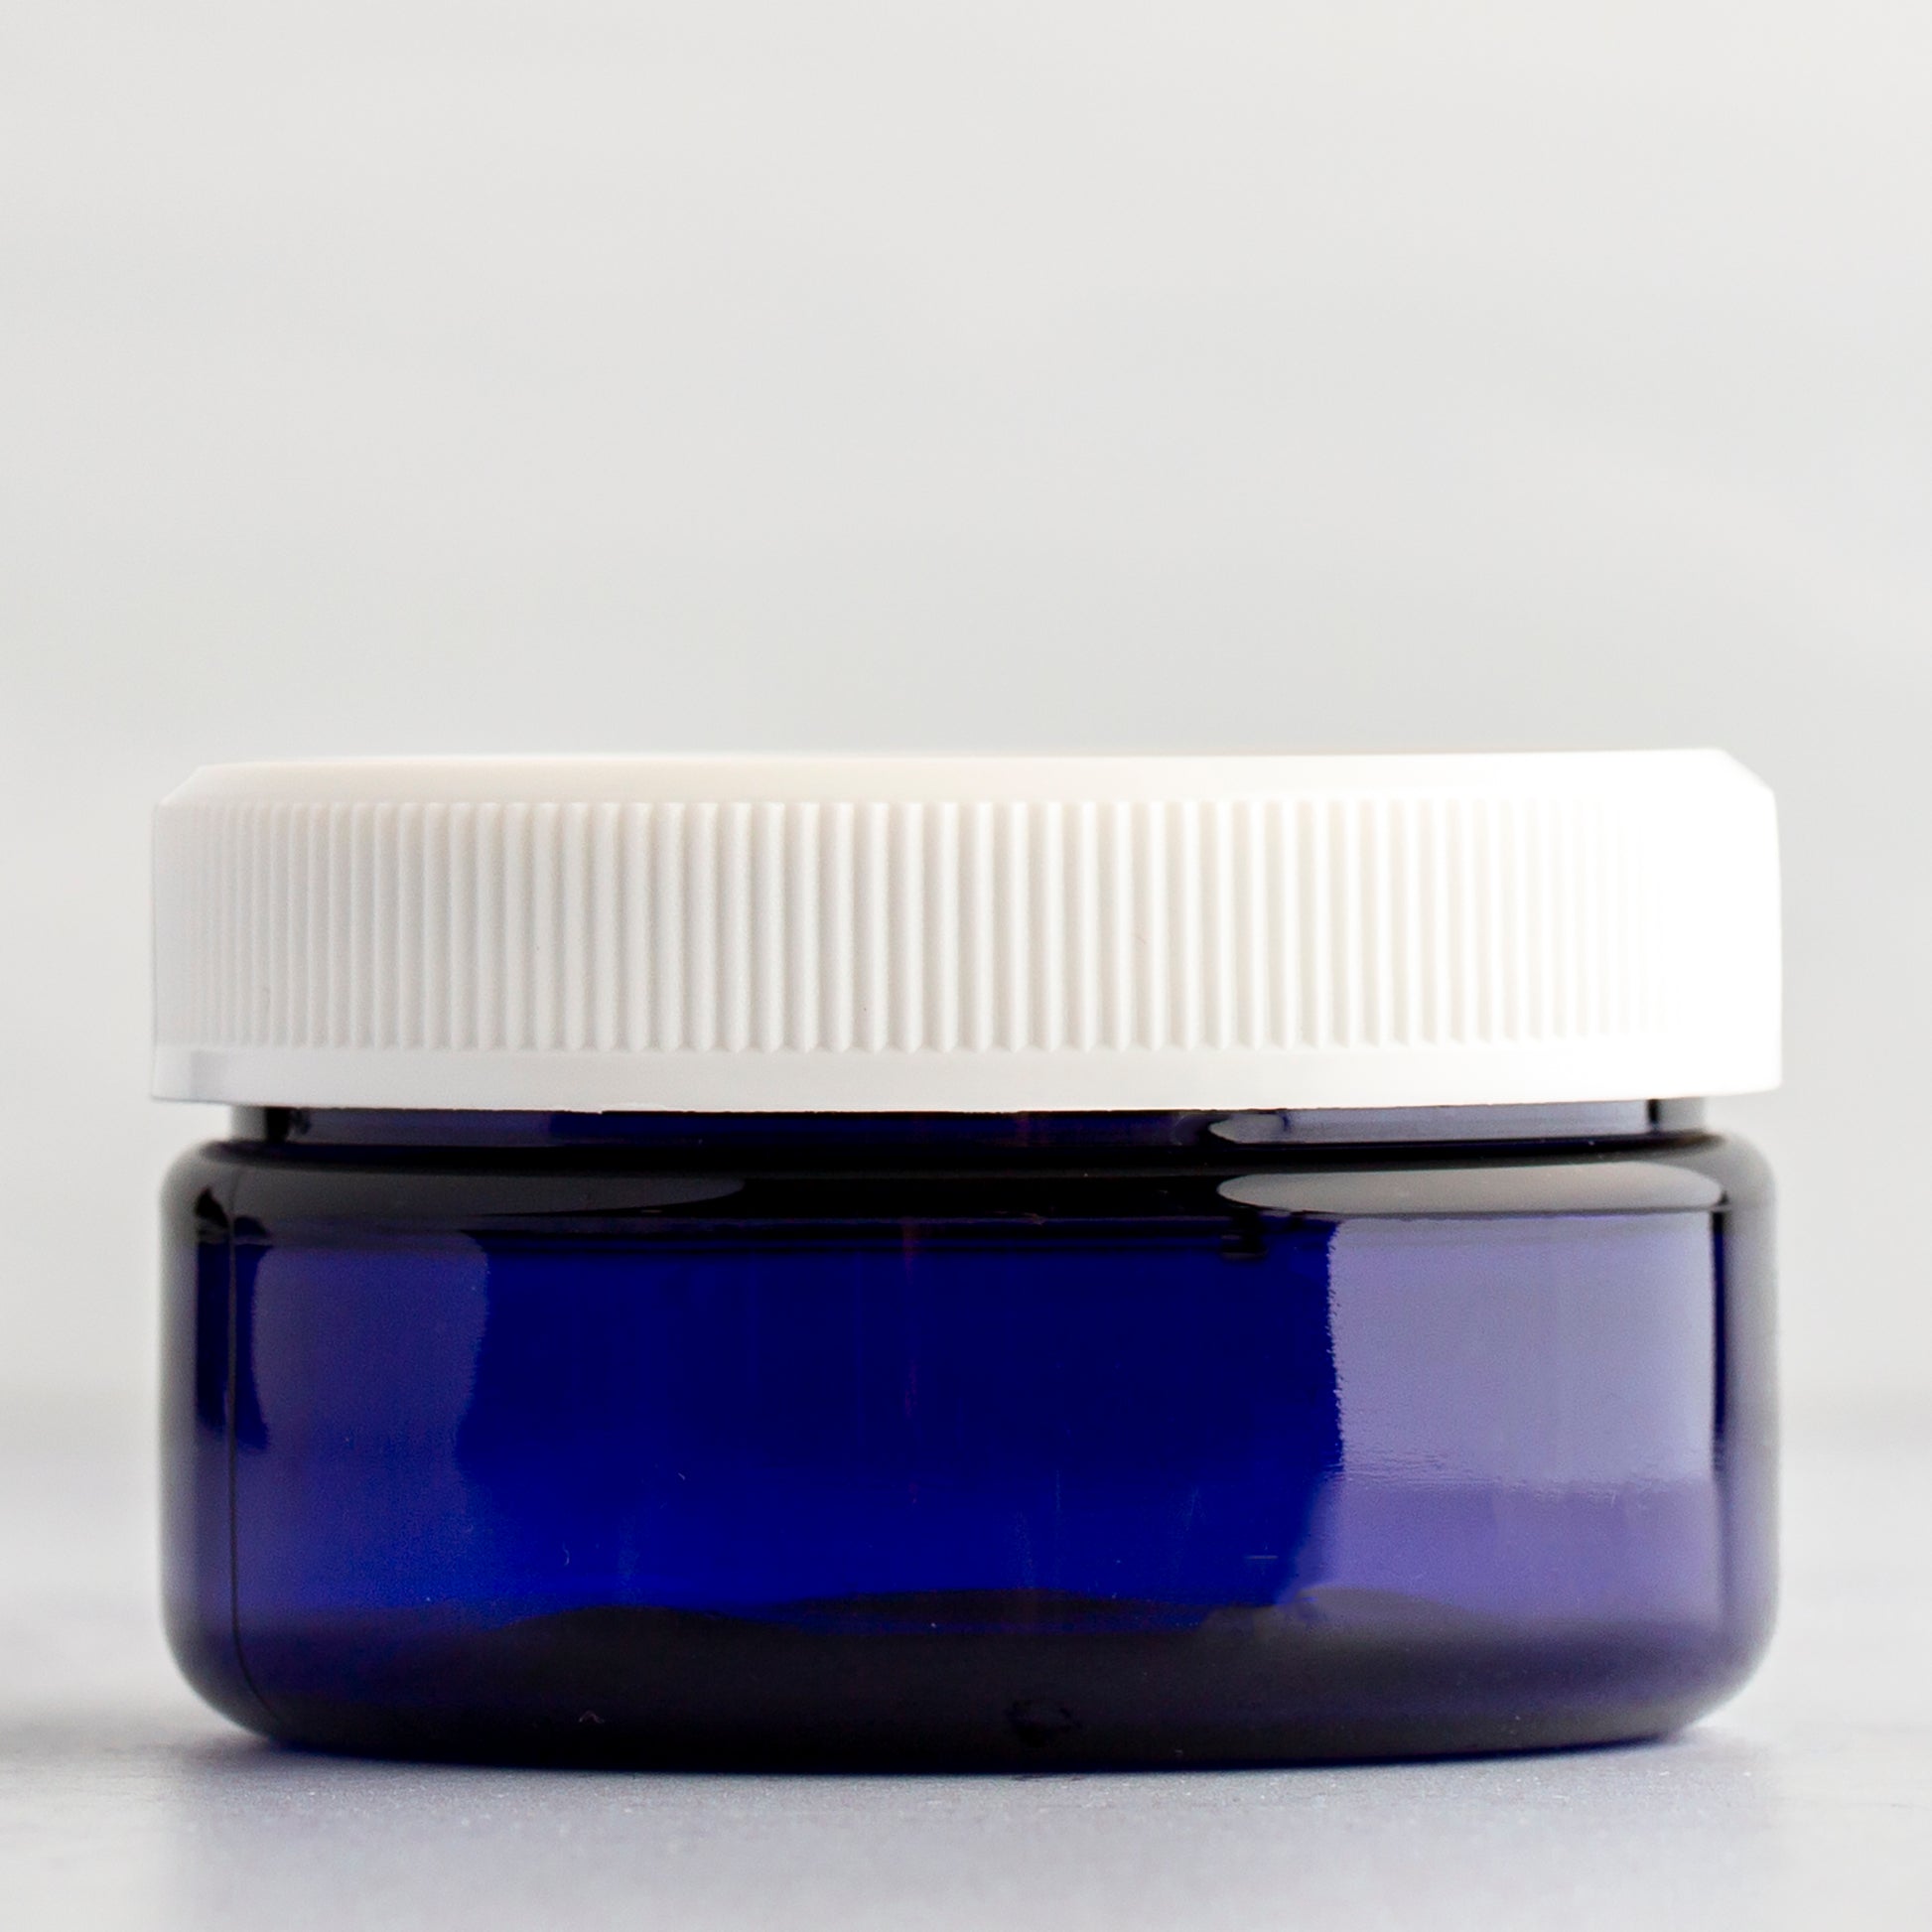 2 oz Blue Shallow Plastic Jar with White Ribbed Cap